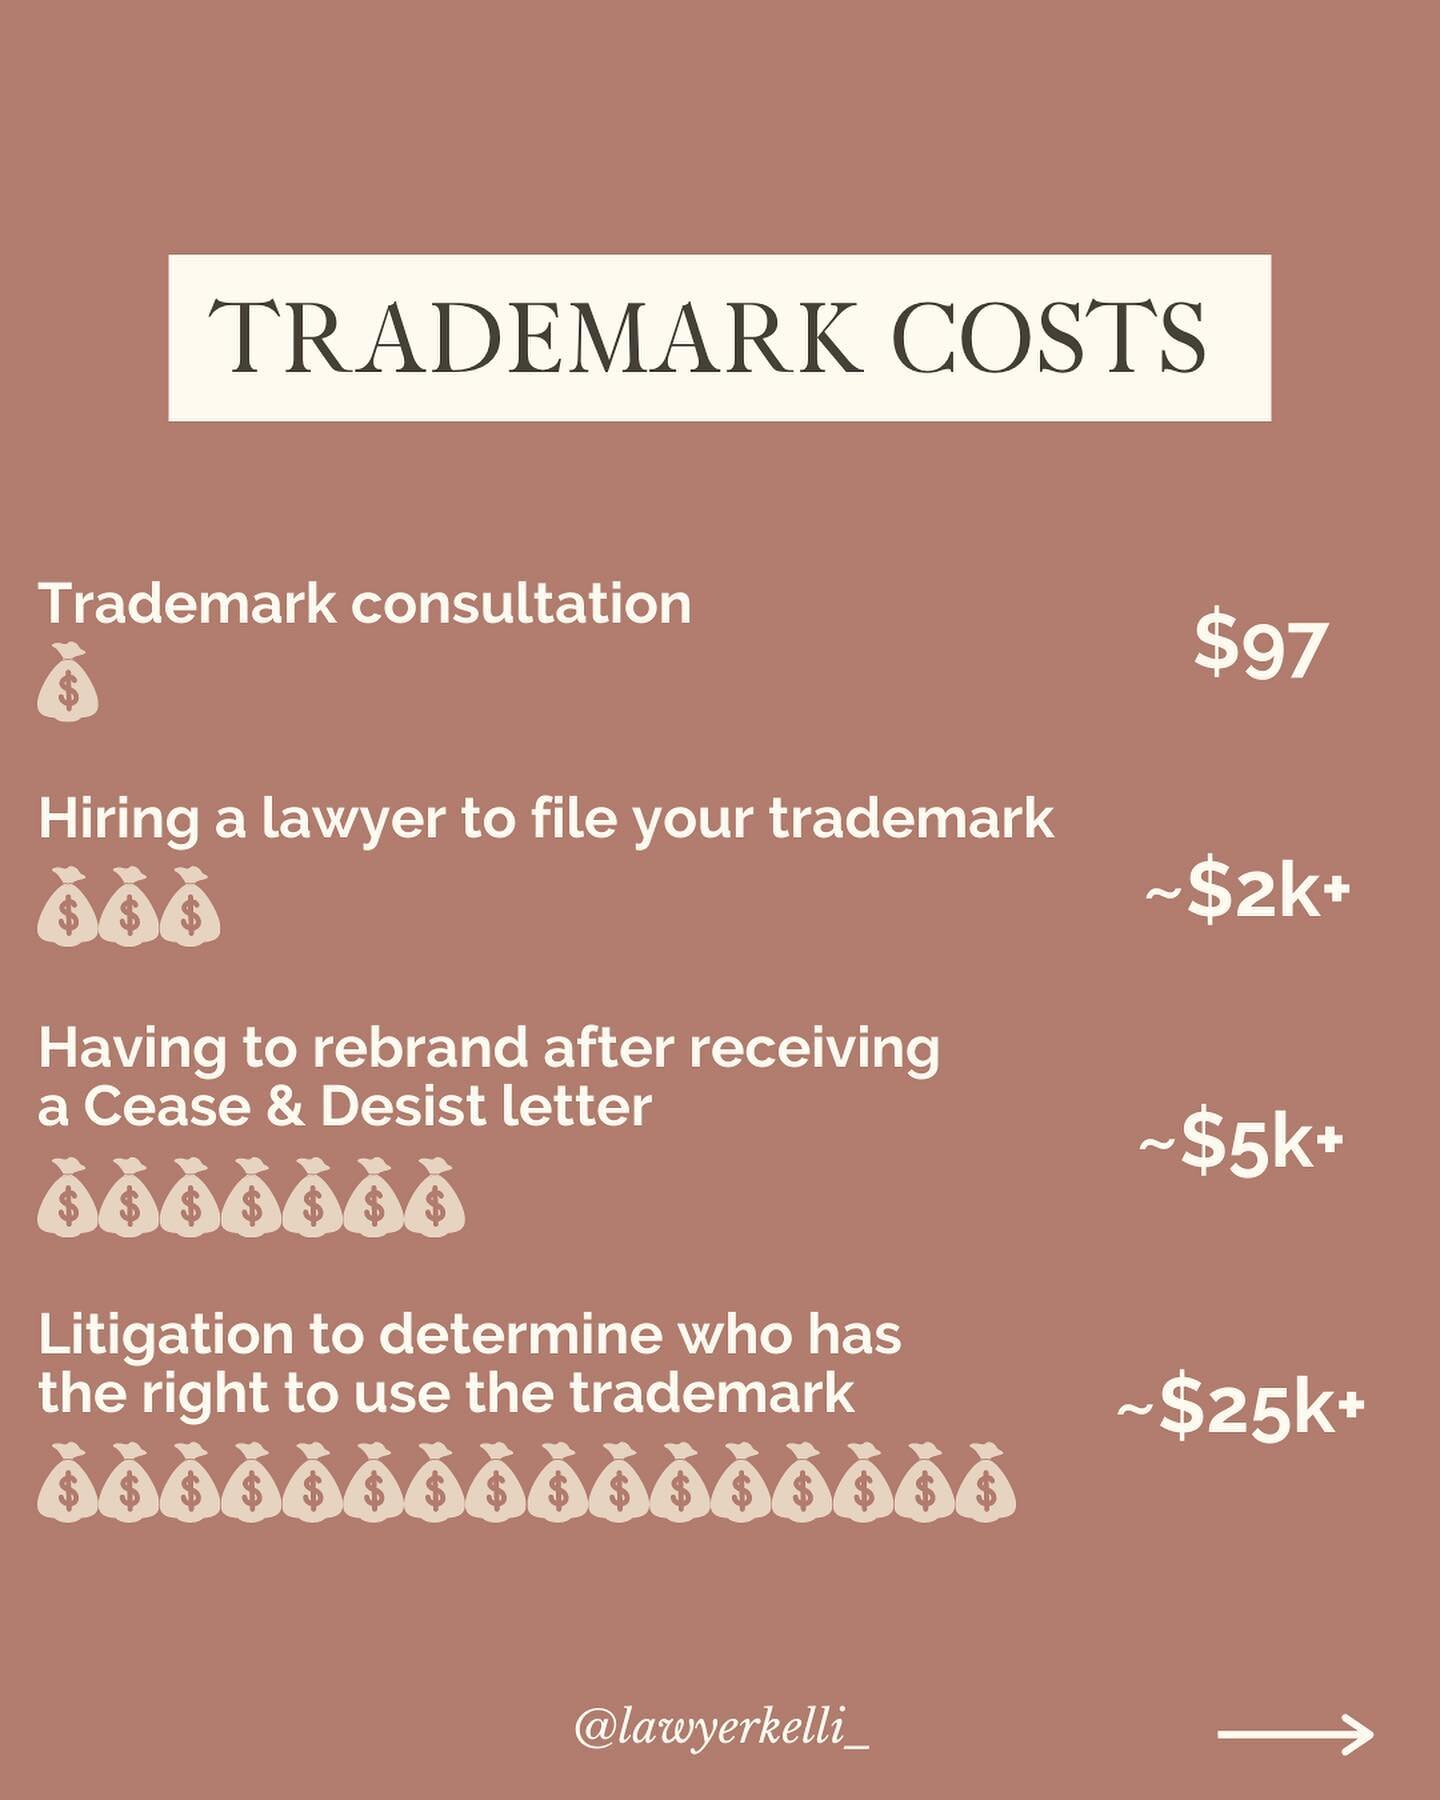 I will never tell you that you HAVE to hire me right now to file your trademark application, or else!!!!!

But I will say that the business owner that is proactive about taking care of the legal side of their business often ends up
👉 saving money
👉